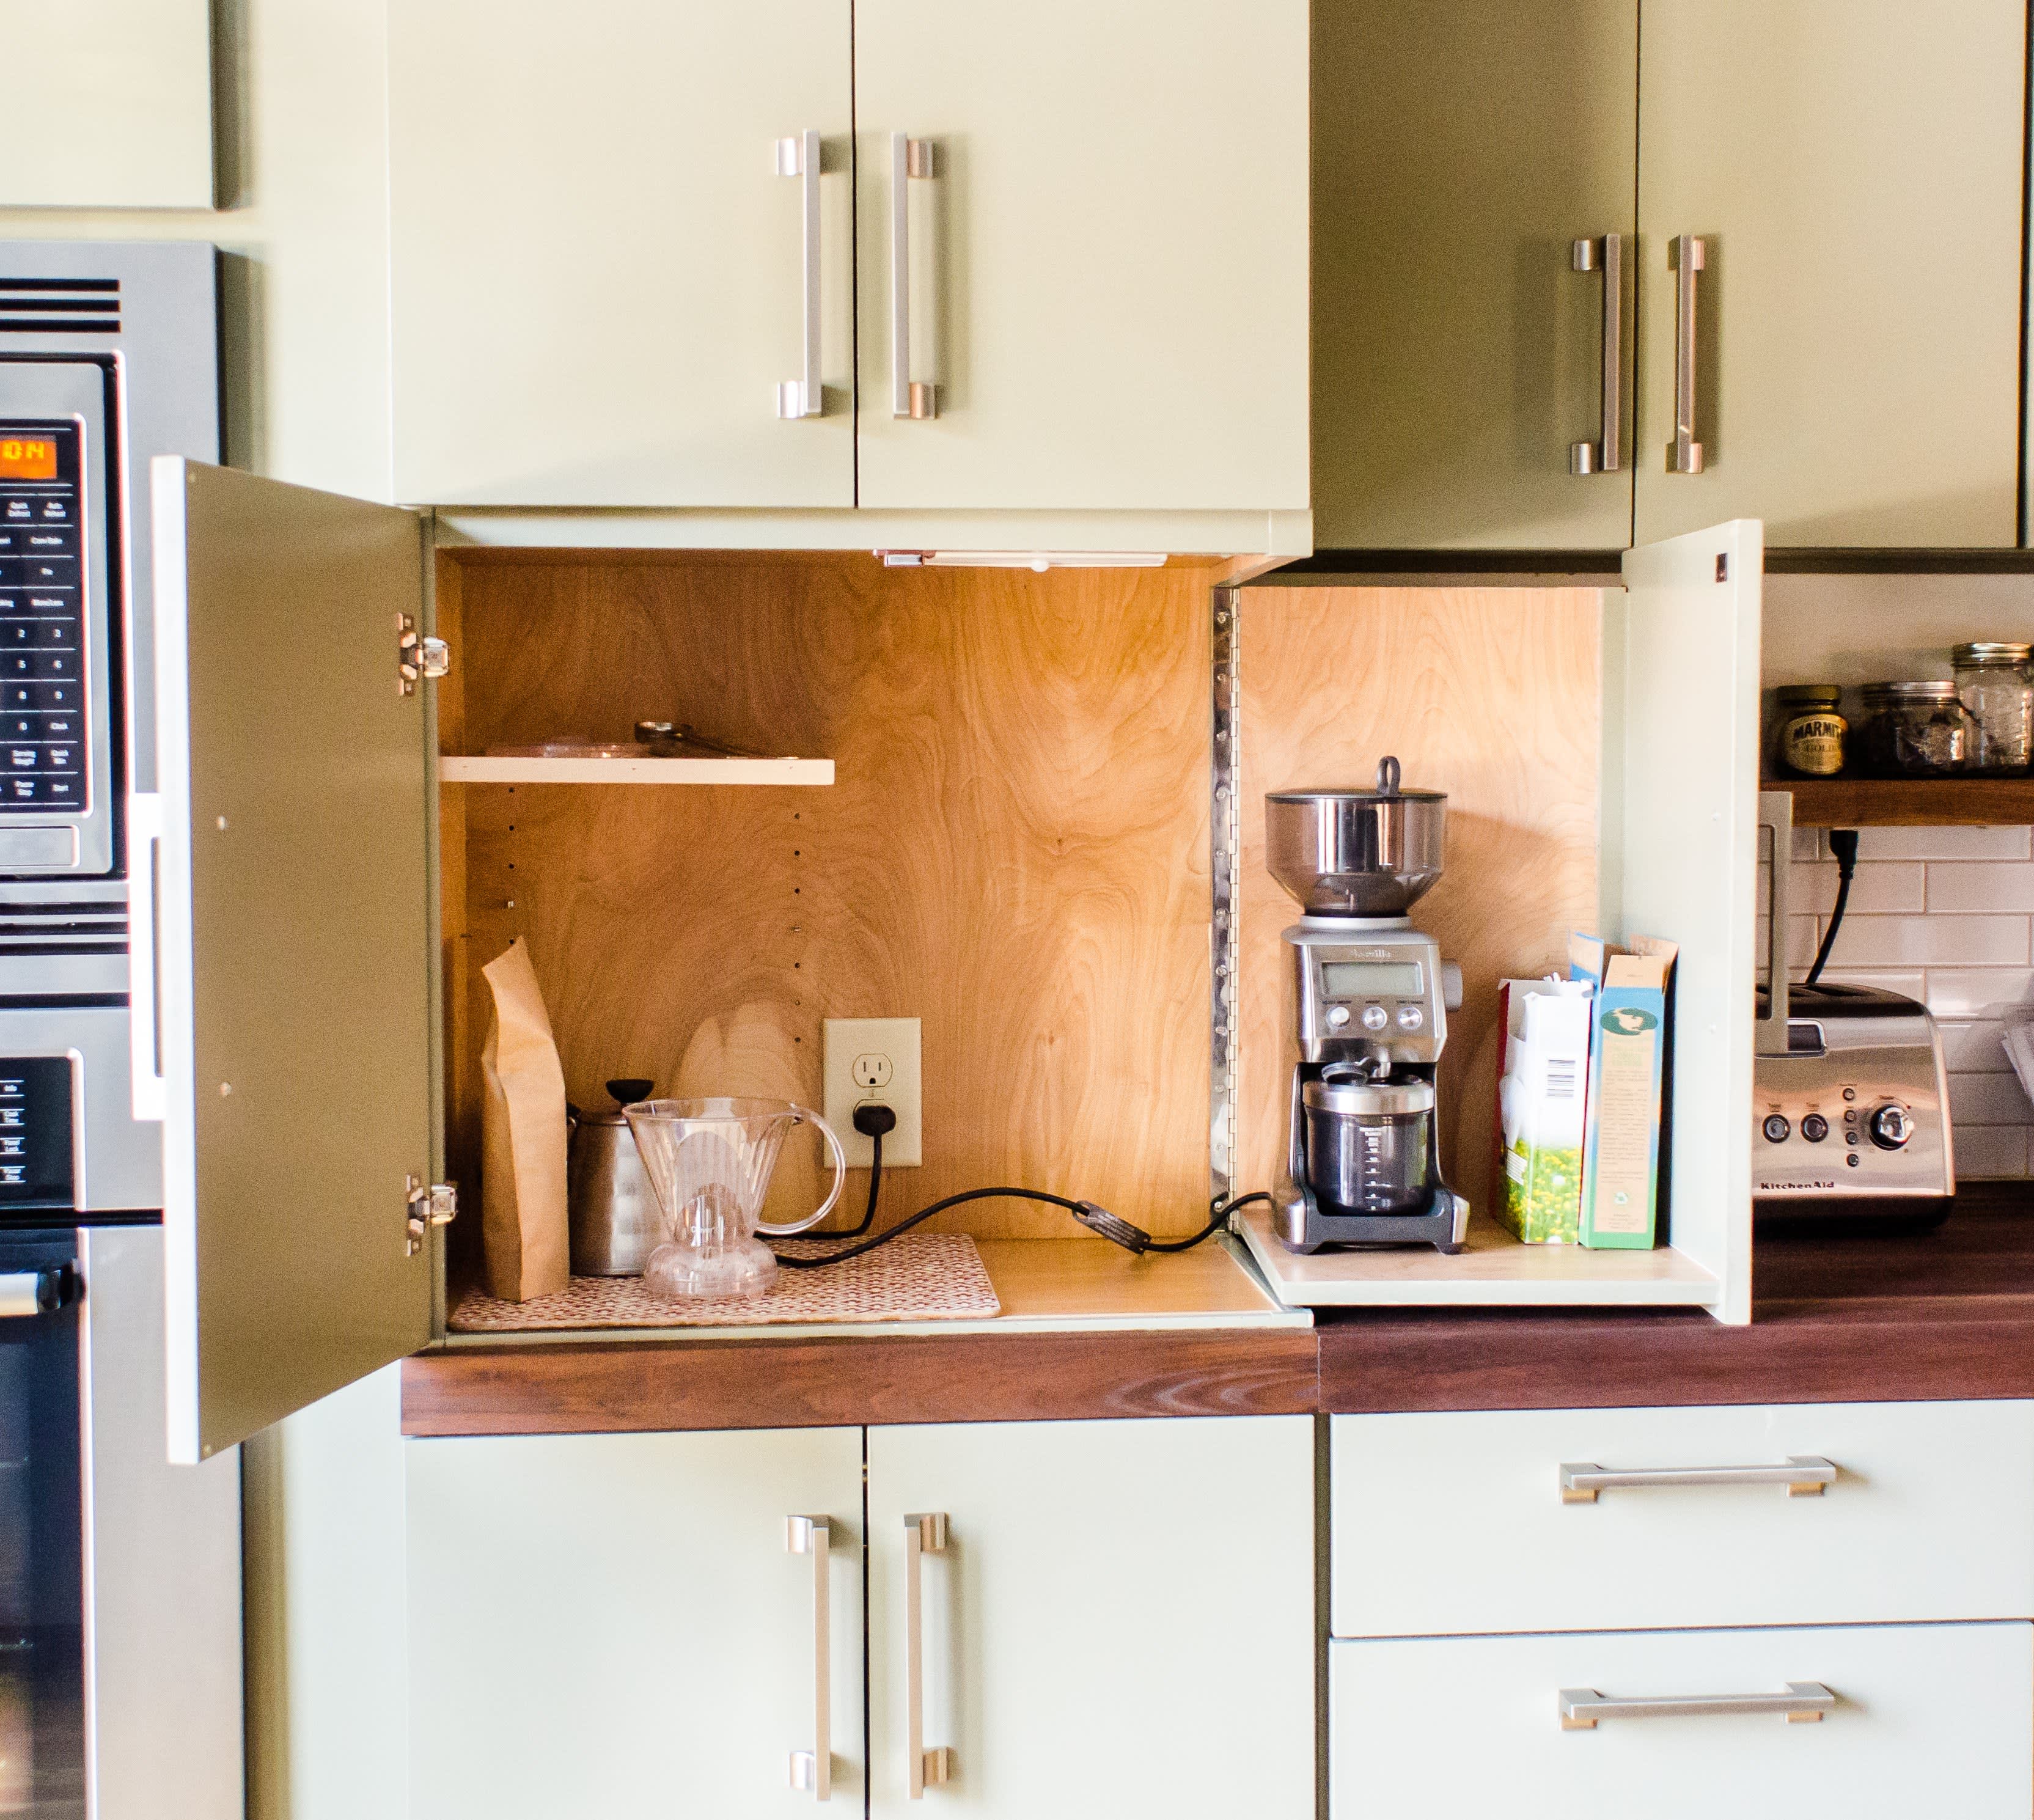 How To Build A Hidden Coffee Station and Microwave 